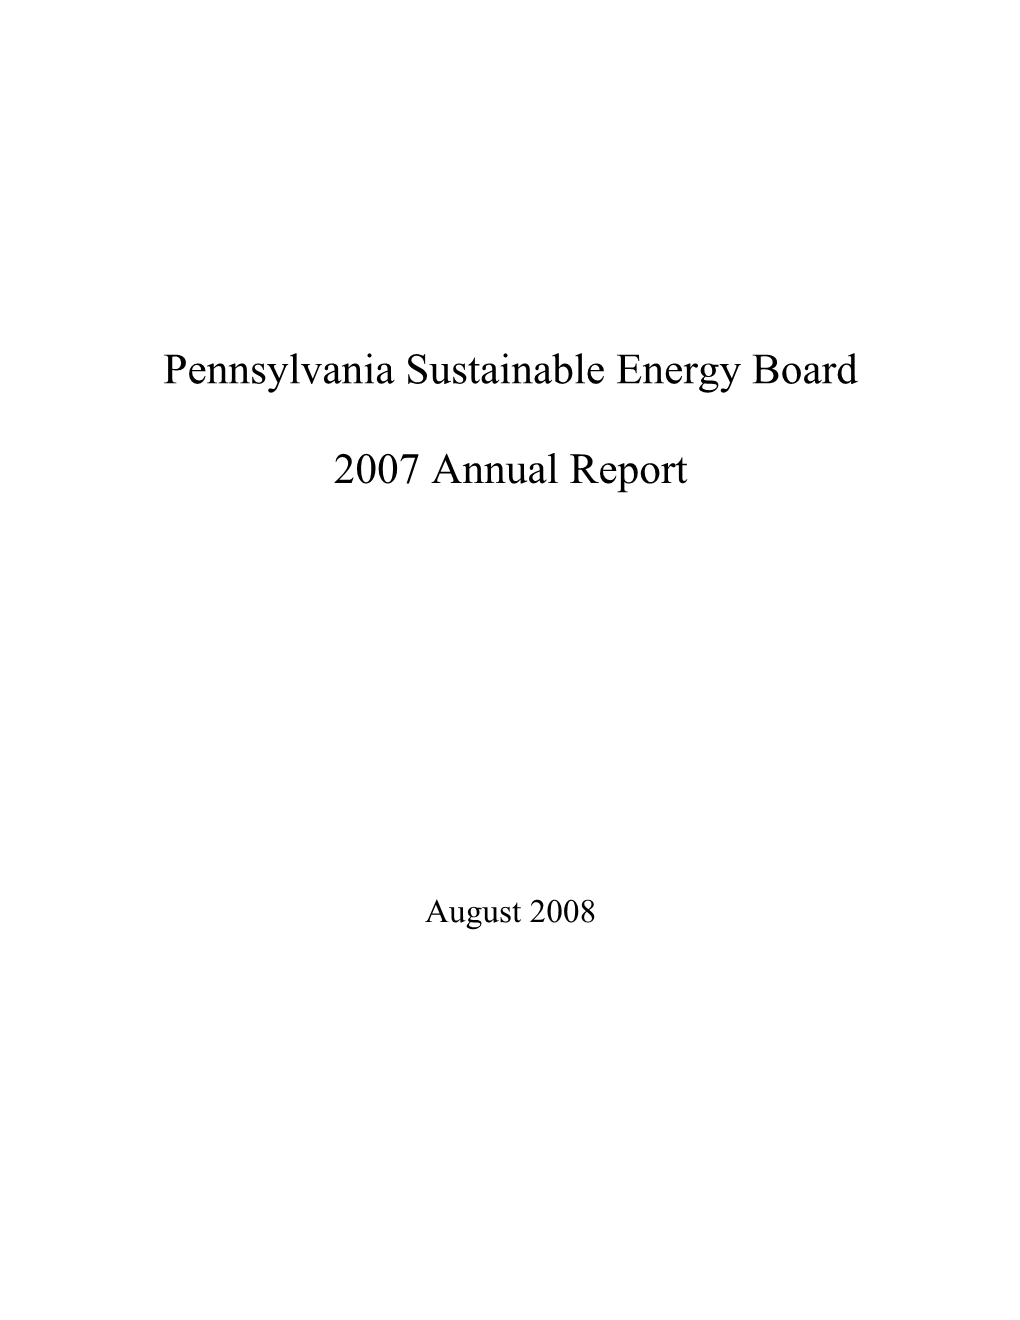 Pennsylvania Sustainable Energy Board 2007 Annual Report